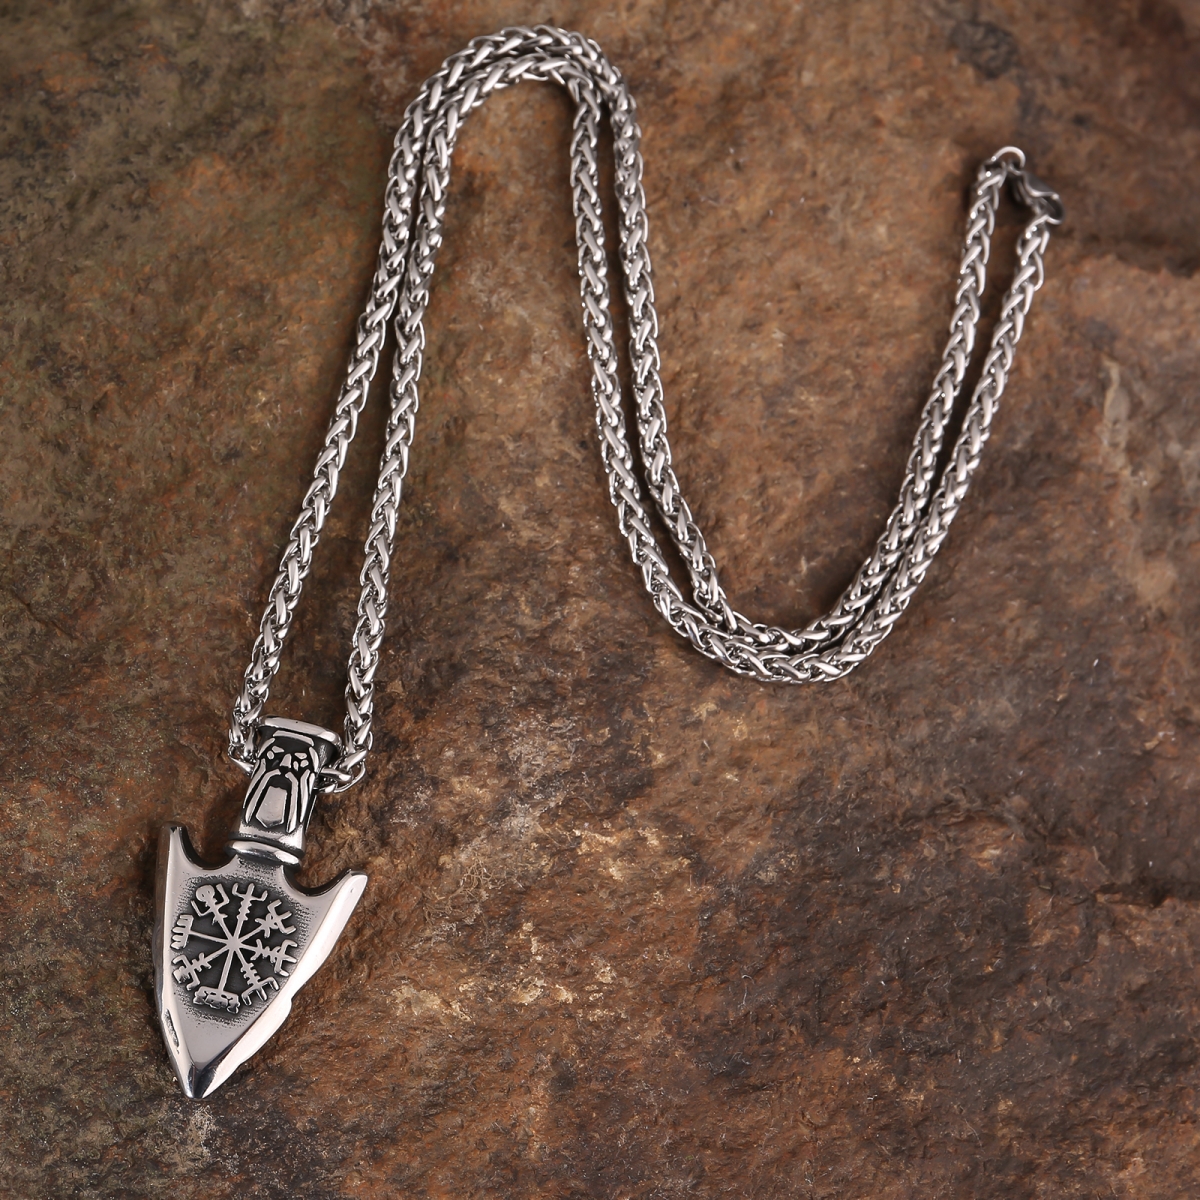 Odin Gungnir Necklace US$2.9/PC-NORSECOLLECTION- Viking Jewelry,Viking Necklace,Viking Bracelet,Viking Rings,Viking Mugs,Viking Accessories,Viking Crafts